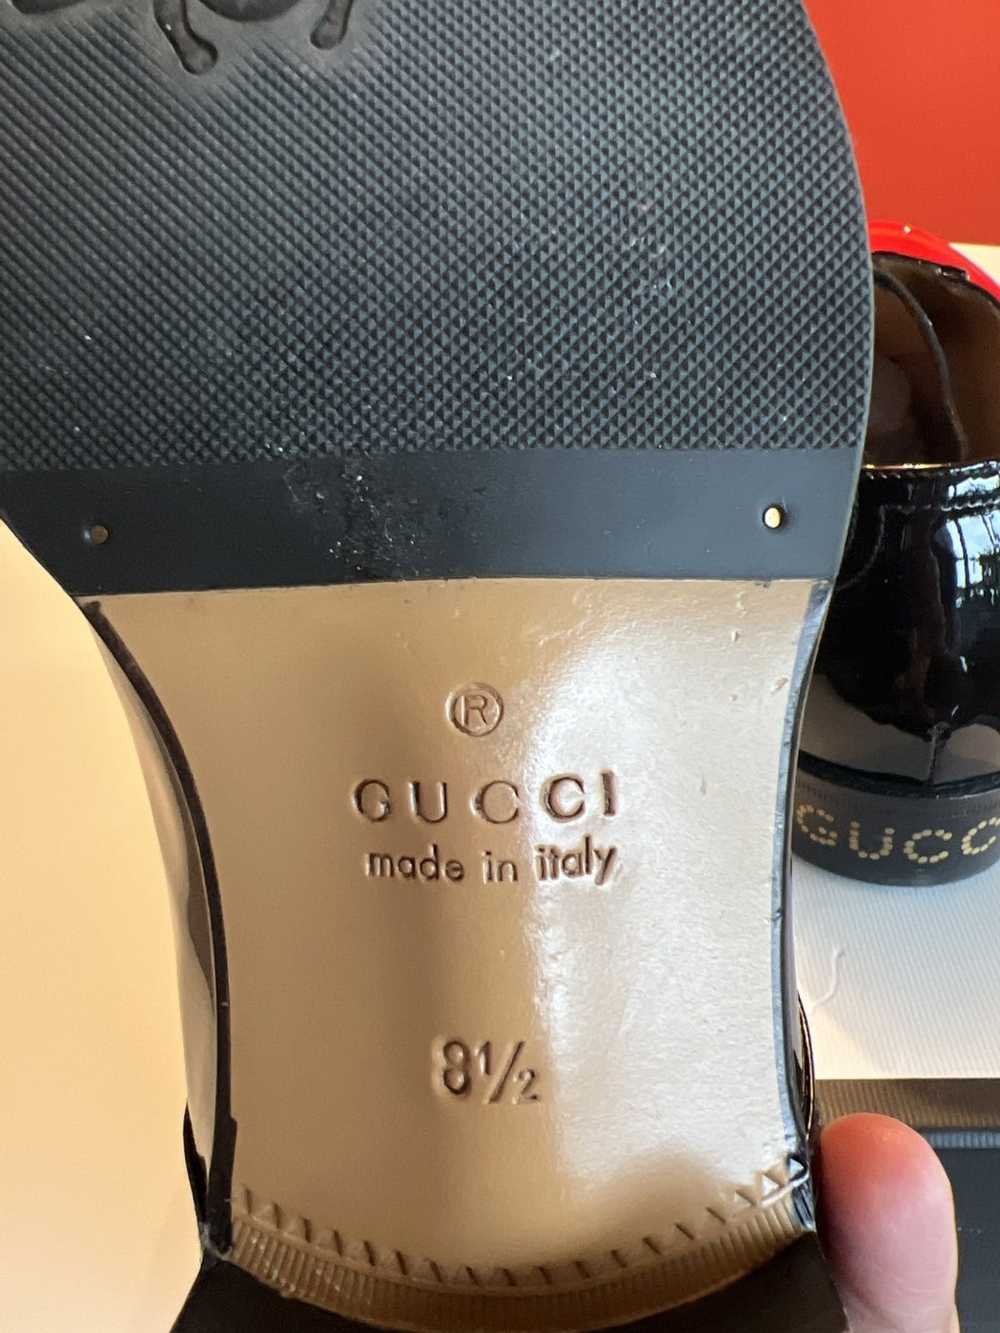 Gucci Gucci vernice Crystal black shoes - image 8